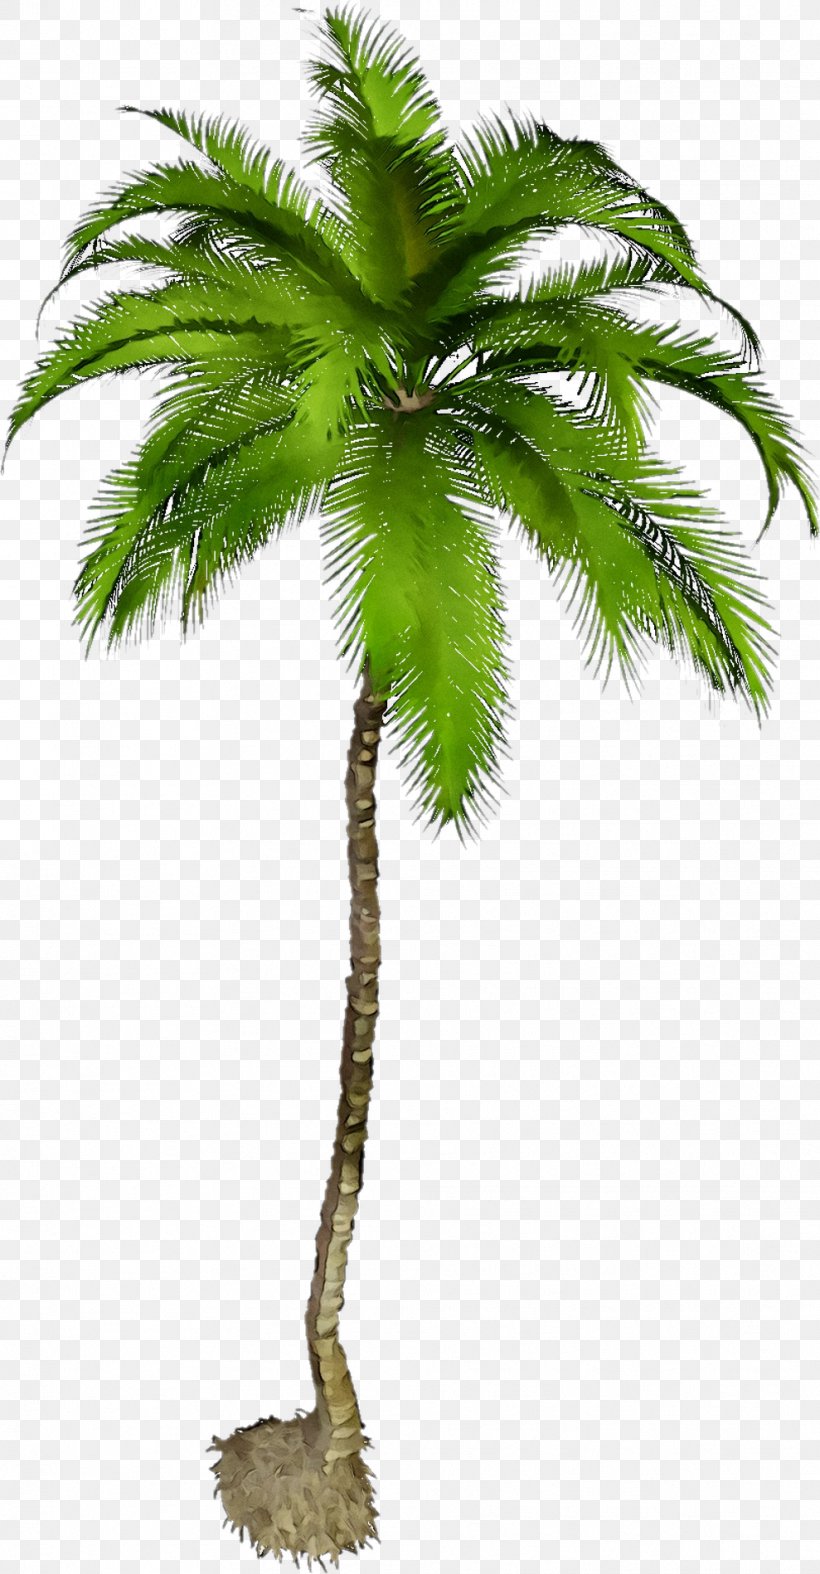 Clip Art Image Palm Trees Graphic Design, PNG, 989x1899px, Palm Trees, Arecales, Attalea Speciosa, Borassus Flabellifer, Botany Download Free